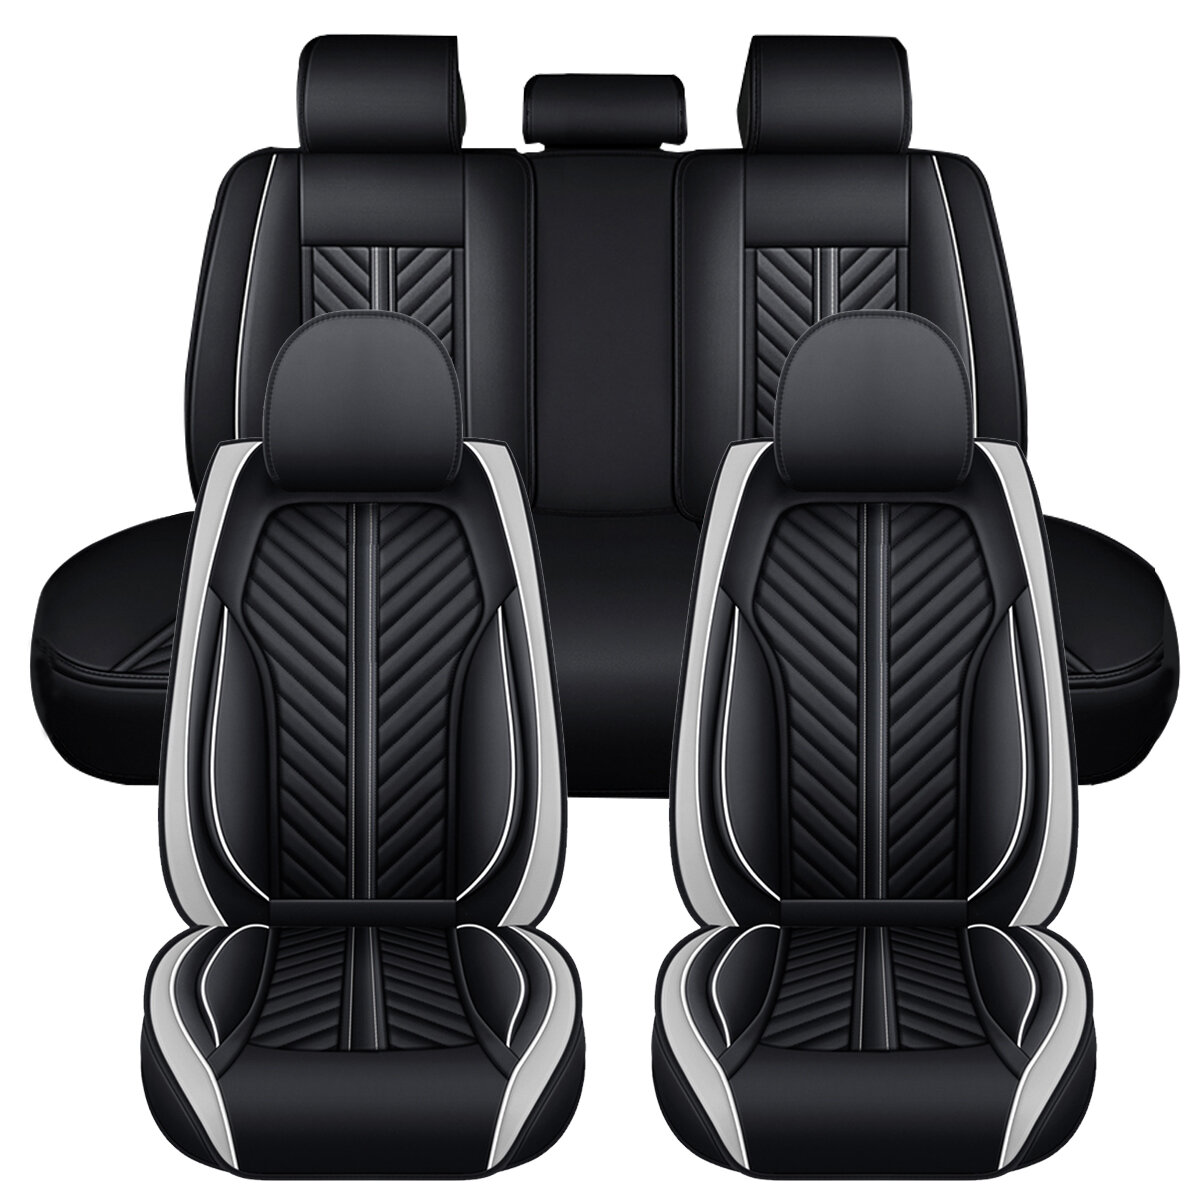 ELUTO 5D 5 Seats PU Leather Full set Car Seat Covers Universal Seat Cushion Pad Mad protector